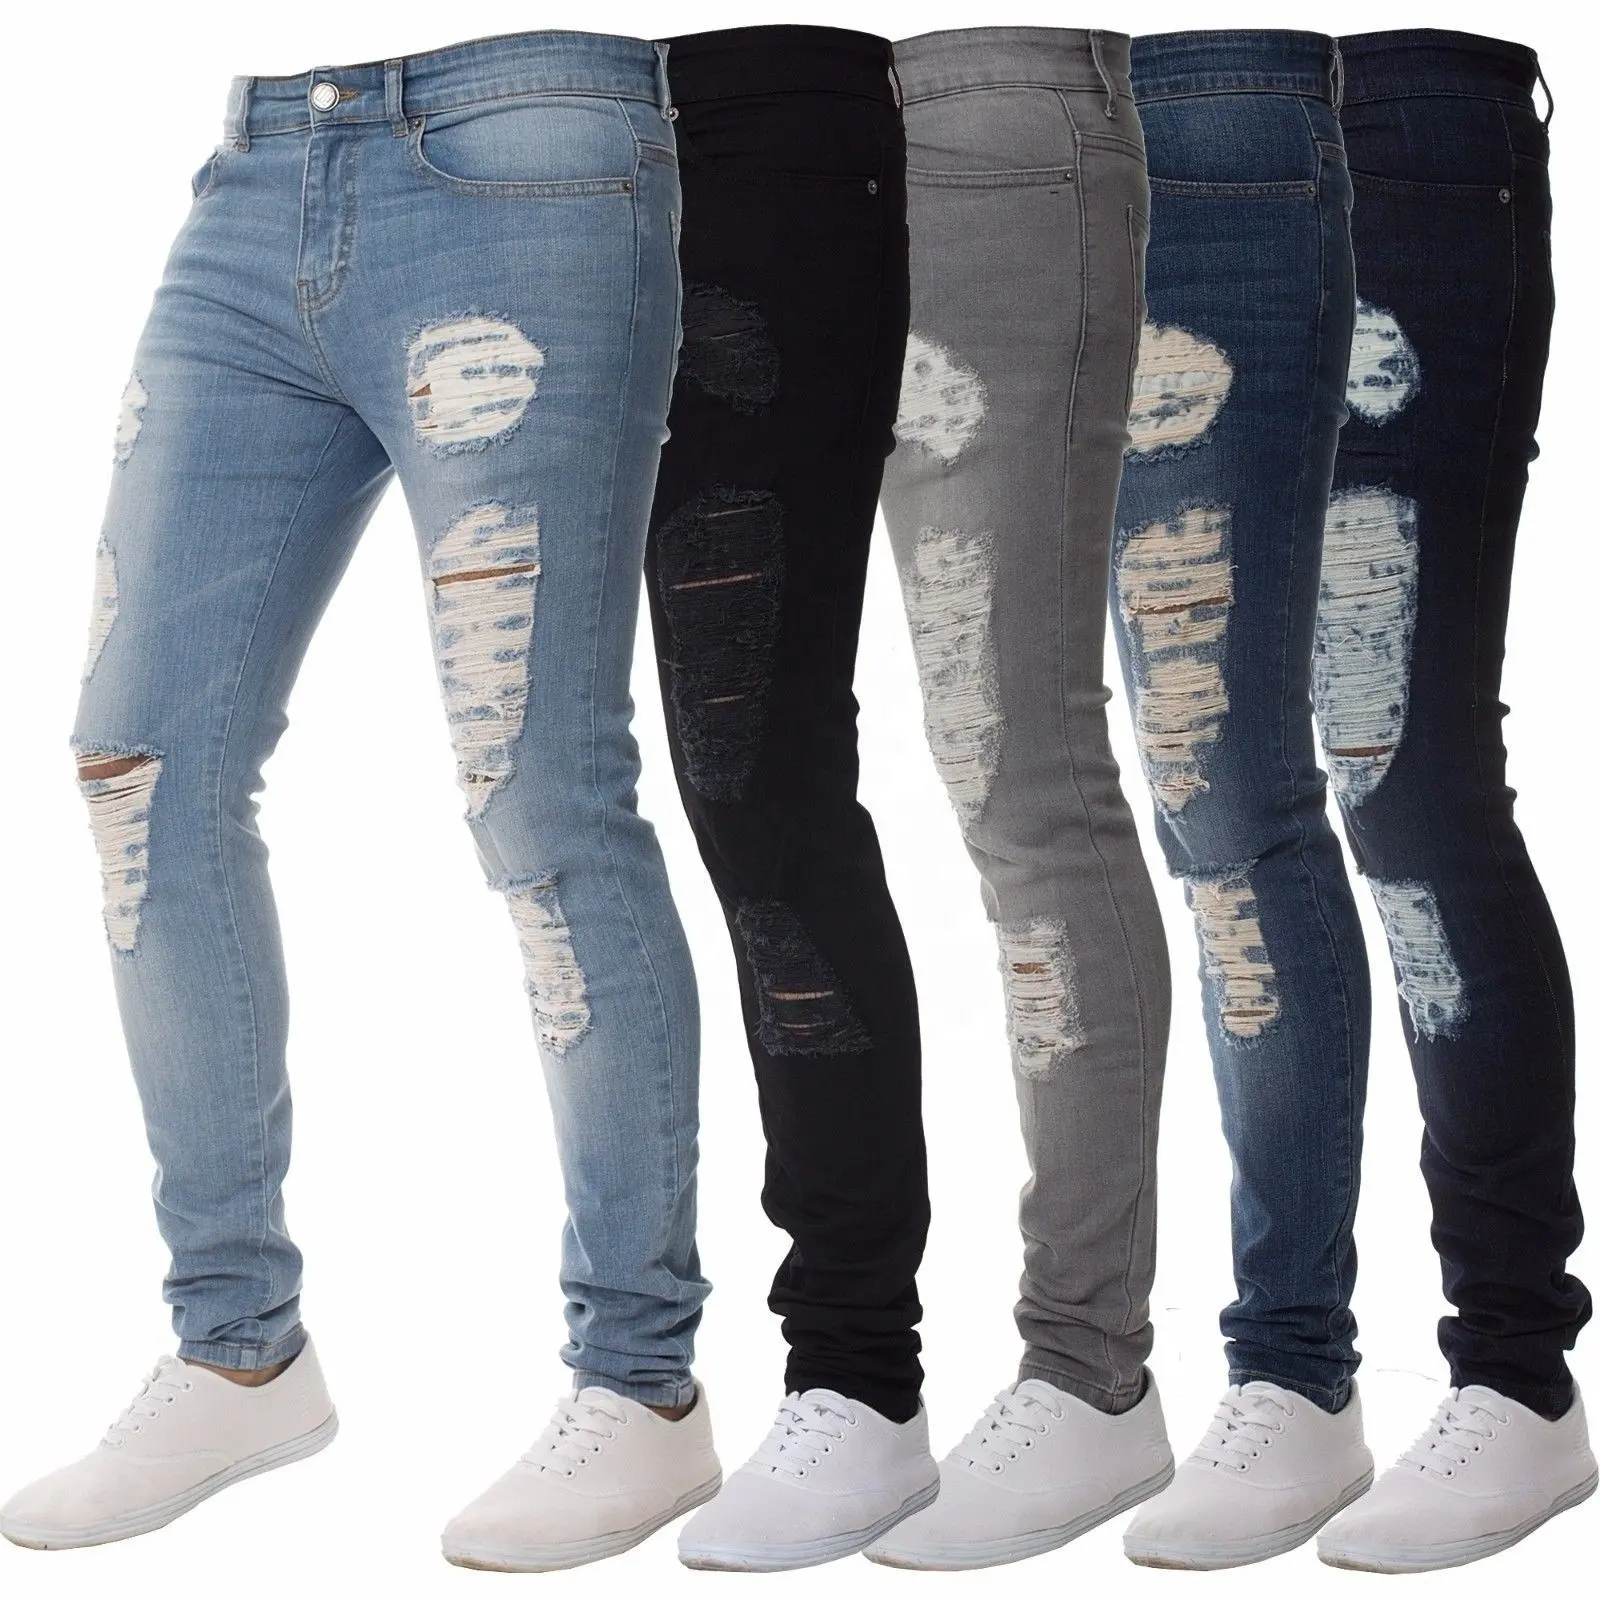 Top selling products on amazon pictures explosion men's jeans pants man jeans men tight skinny jeans